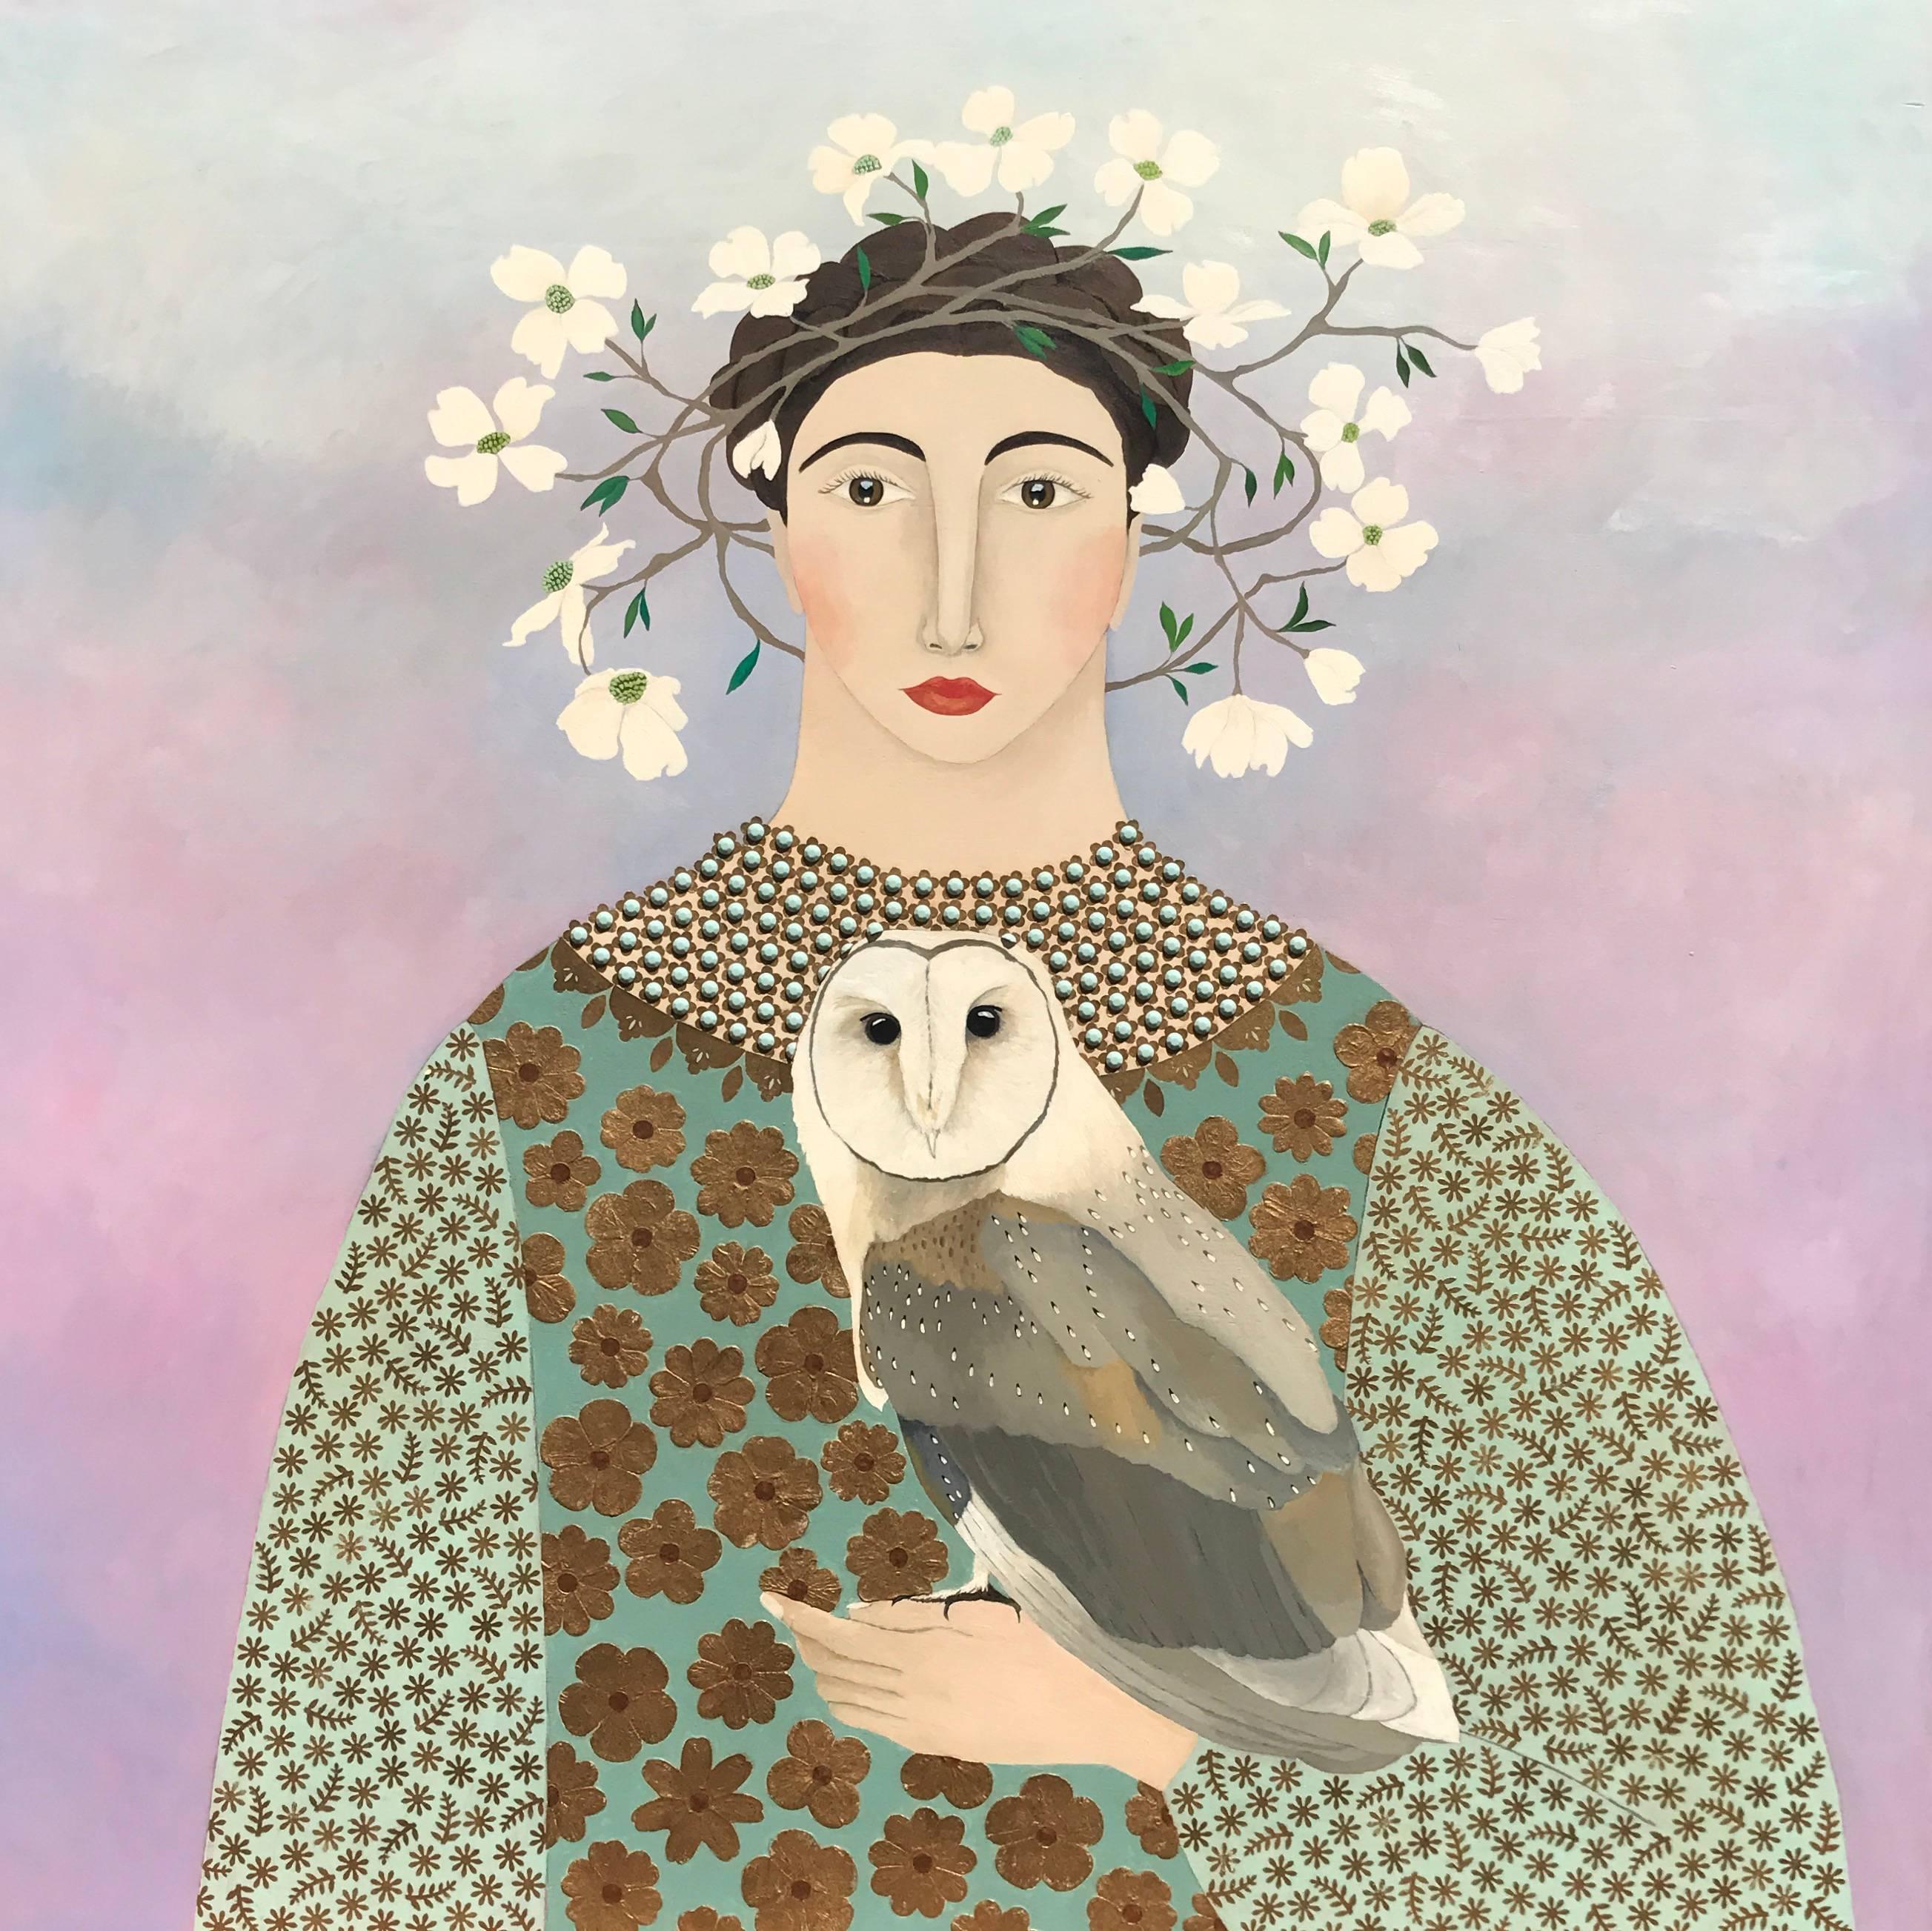 Leslie Barron Portrait Painting - "Afternoon Visit" Folksy Mixed Media, Owl and Woman with Floral Crown in Pastels